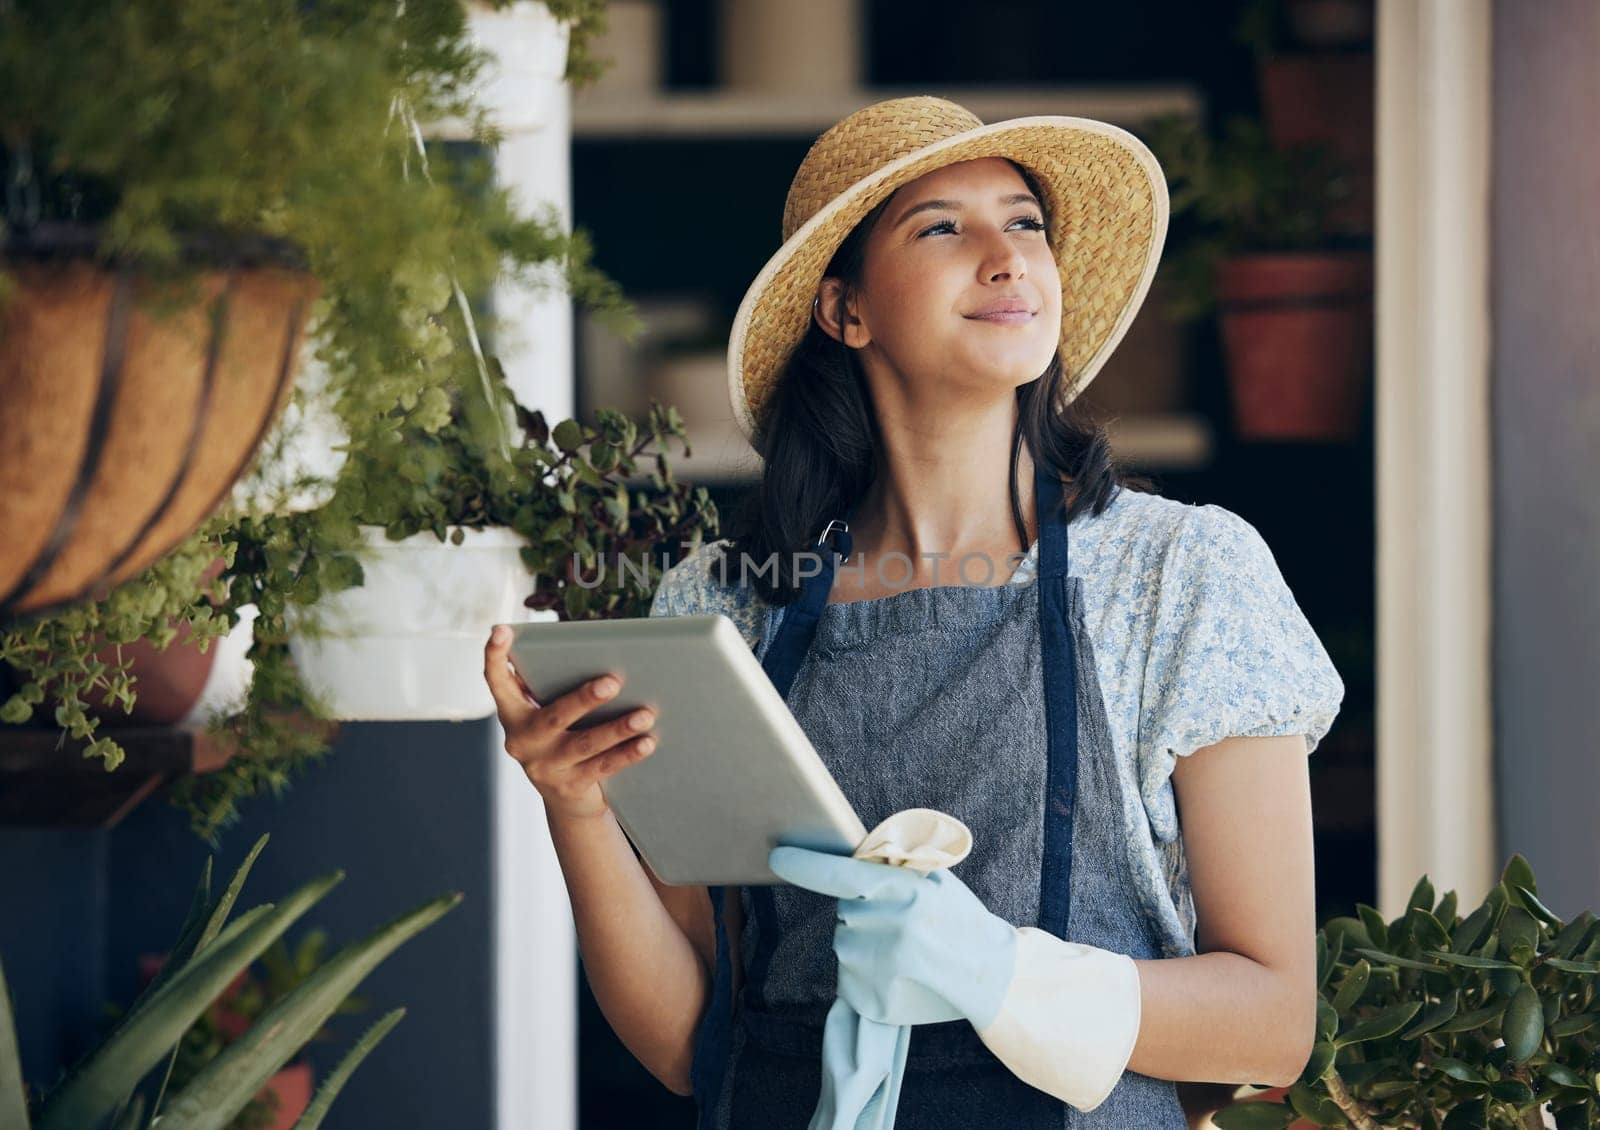 Florist, tablet or woman in business thinking for growth, development ideas and agriculture service. Gardener, nursery and girl farming for plants, horticulture research and floral results online.